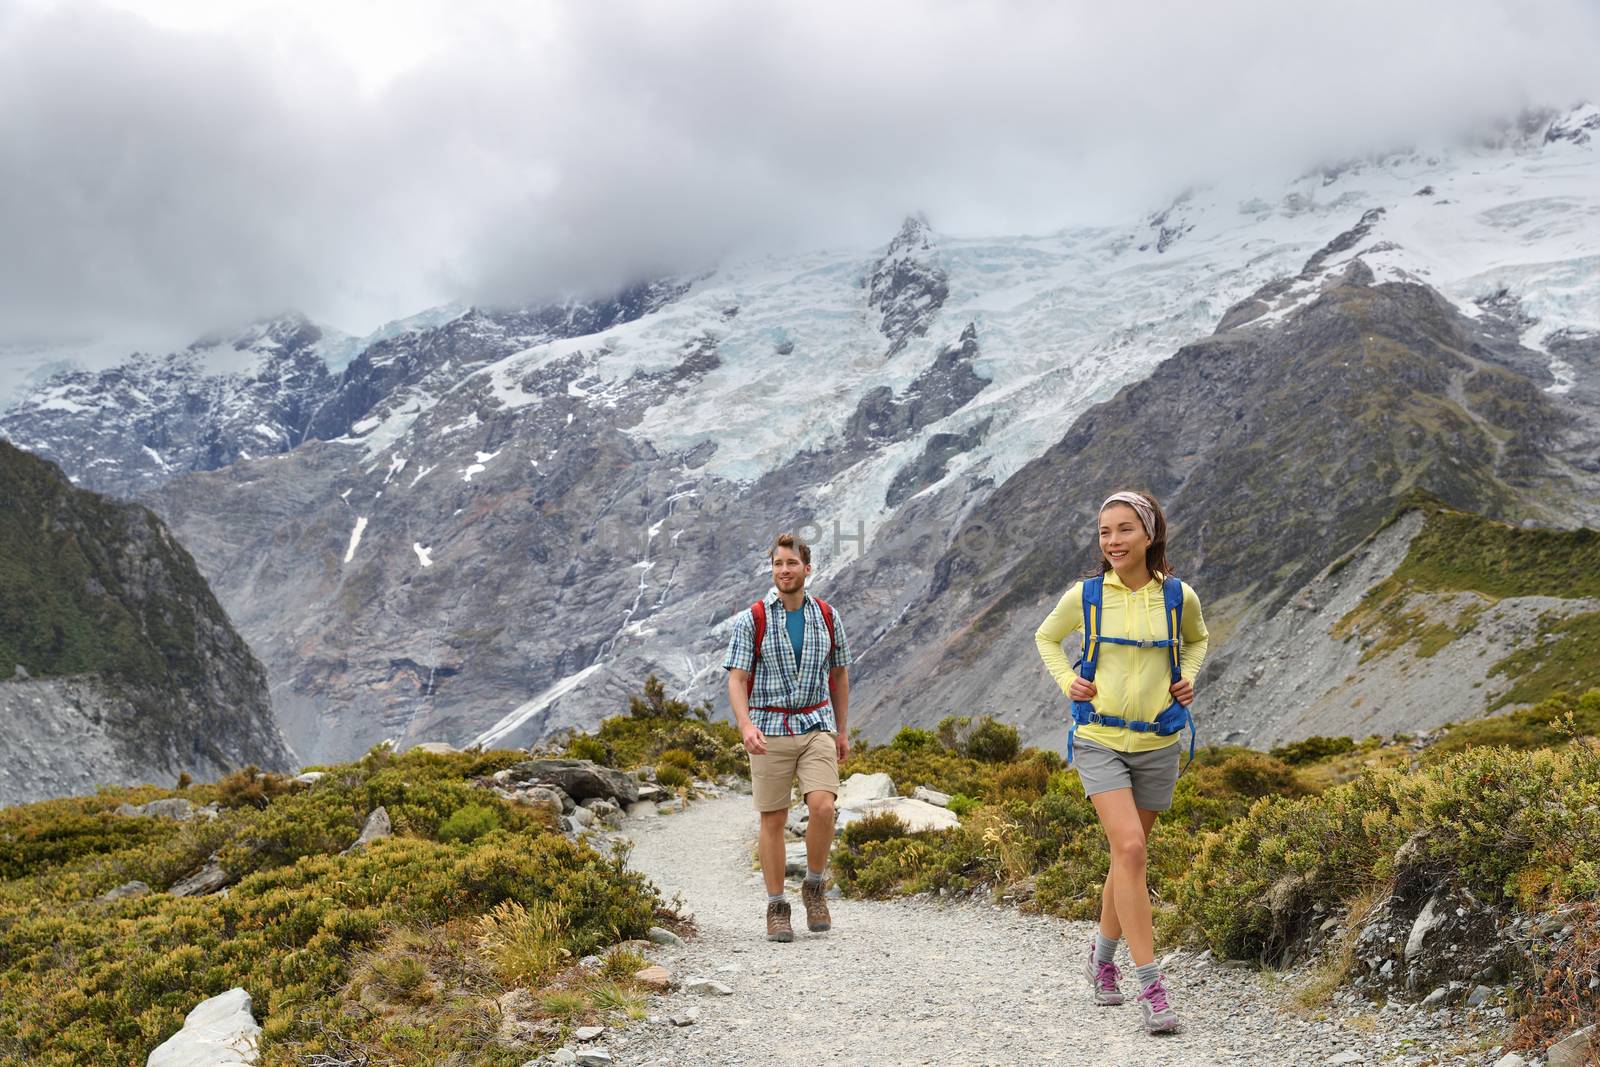 New Zealand backpackers tramping on Mount Cook / Aoraki Hooker valley travel. Backpacking hikers hiking on walking on Hooker Valley Track. Snow capped mountains glacier landscape. Couple on adventure by Maridav